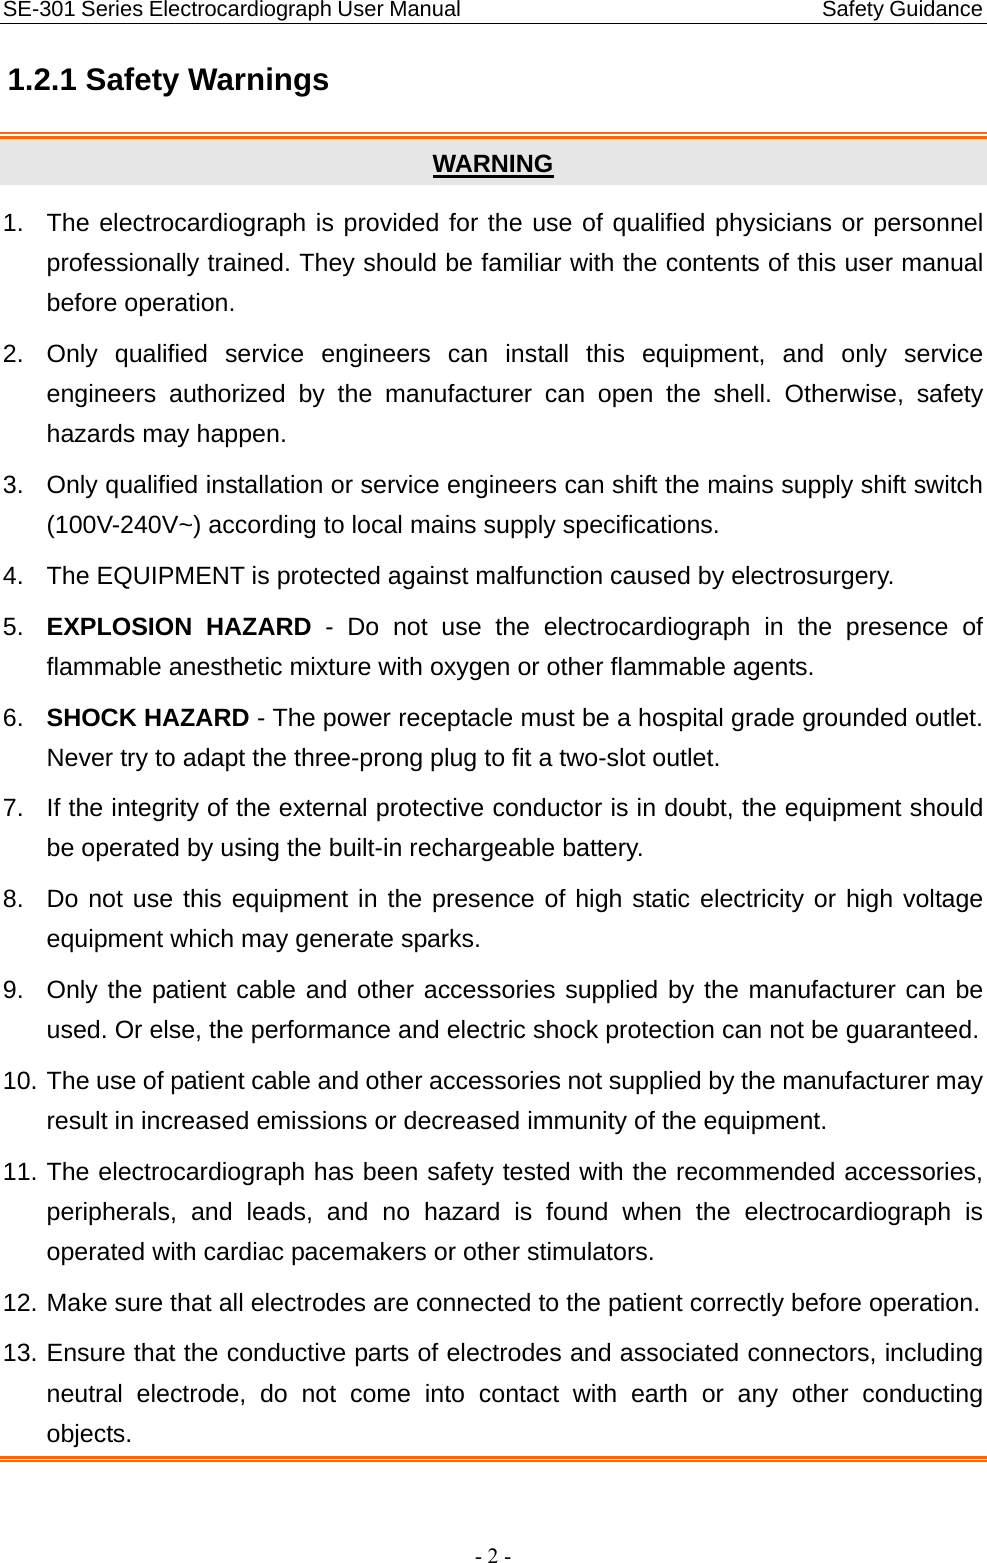 SE-301 Series Electrocardiograph User Manual                                 Safety Guidance - 2 - 1.2.1 Safety Warnings WARNING 1.  The electrocardiograph is provided for the use of qualified physicians or personnel professionally trained. They should be familiar with the contents of this user manual before operation. 2.  Only qualified service engineers can install this equipment, and only service engineers authorized by the manufacturer can open the shell. Otherwise, safety hazards may happen. 3.  Only qualified installation or service engineers can shift the mains supply shift switch (100V-240V~) according to local mains supply specifications. 4.  The EQUIPMENT is protected against malfunction caused by electrosurgery. 5.  EXPLOSION HAZARD - Do not use the electrocardiograph in the presence of flammable anesthetic mixture with oxygen or other flammable agents. 6.  SHOCK HAZARD - The power receptacle must be a hospital grade grounded outlet. Never try to adapt the three-prong plug to fit a two-slot outlet. 7.  If the integrity of the external protective conductor is in doubt, the equipment should be operated by using the built-in rechargeable battery. 8.  Do not use this equipment in the presence of high static electricity or high voltage equipment which may generate sparks. 9.  Only the patient cable and other accessories supplied by the manufacturer can be used. Or else, the performance and electric shock protection can not be guaranteed.   10. The use of patient cable and other accessories not supplied by the manufacturer may result in increased emissions or decreased immunity of the equipment. 11. The electrocardiograph has been safety tested with the recommended accessories, peripherals, and leads, and no hazard is found when the electrocardiograph is operated with cardiac pacemakers or other stimulators. 12. Make sure that all electrodes are connected to the patient correctly before operation. 13. Ensure that the conductive parts of electrodes and associated connectors, including neutral electrode, do not come into contact with earth or any other conducting objects.  